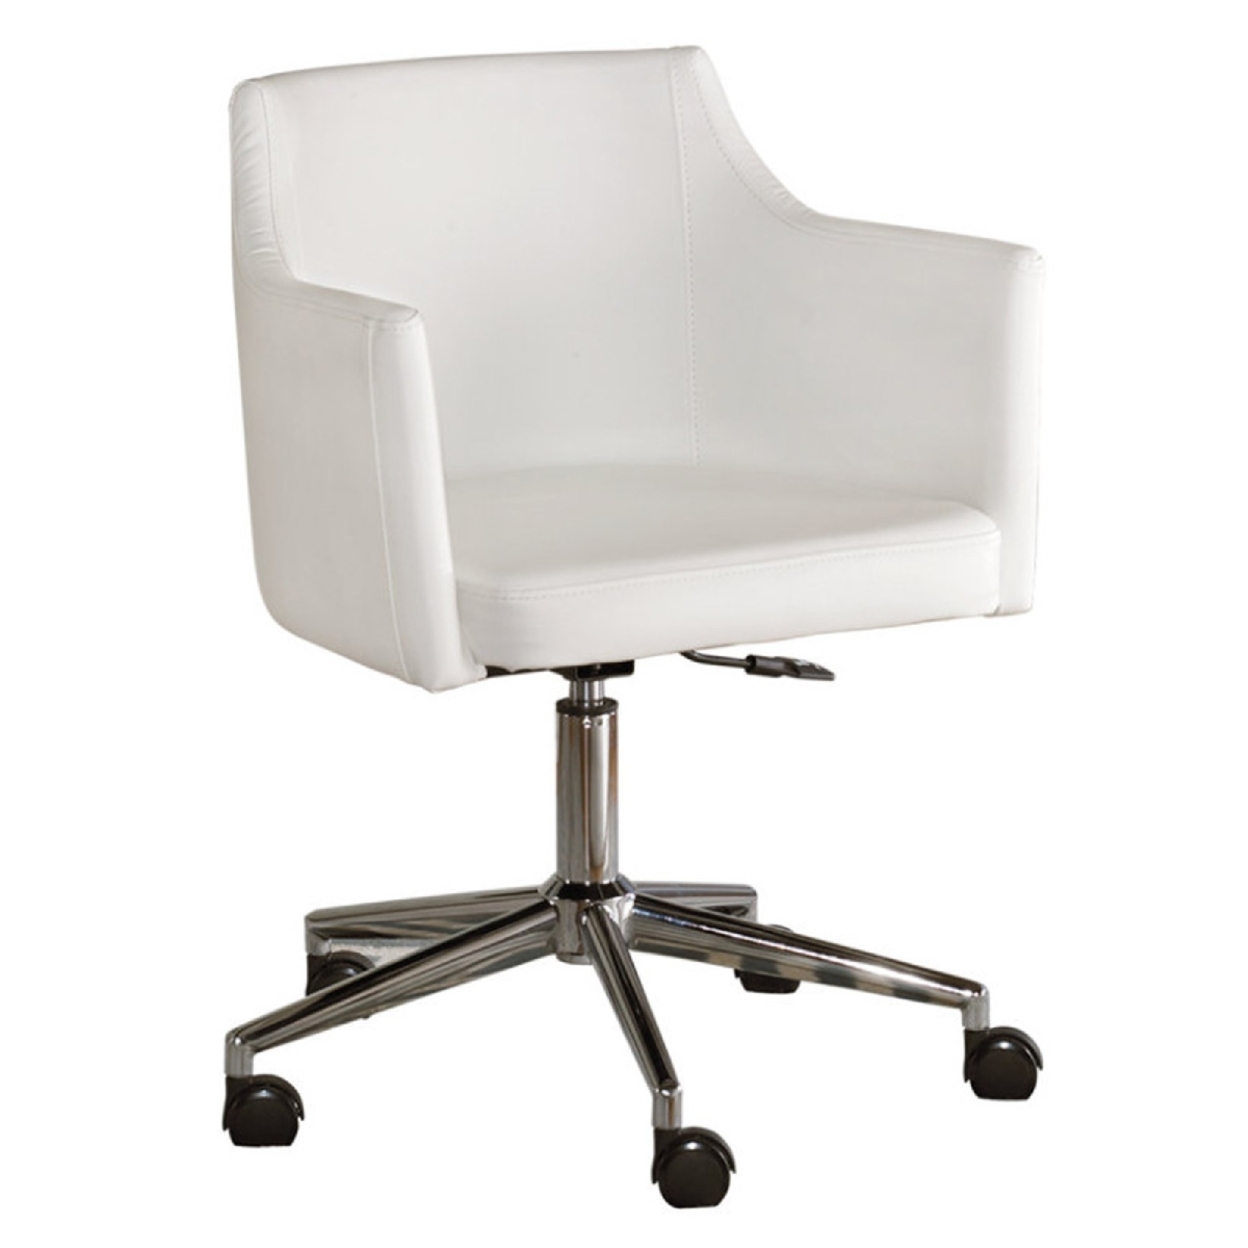 Faux Leather Upholster Metal Swivel Chair With Low Profile Back, White And Silver- Saltoro Sherpi